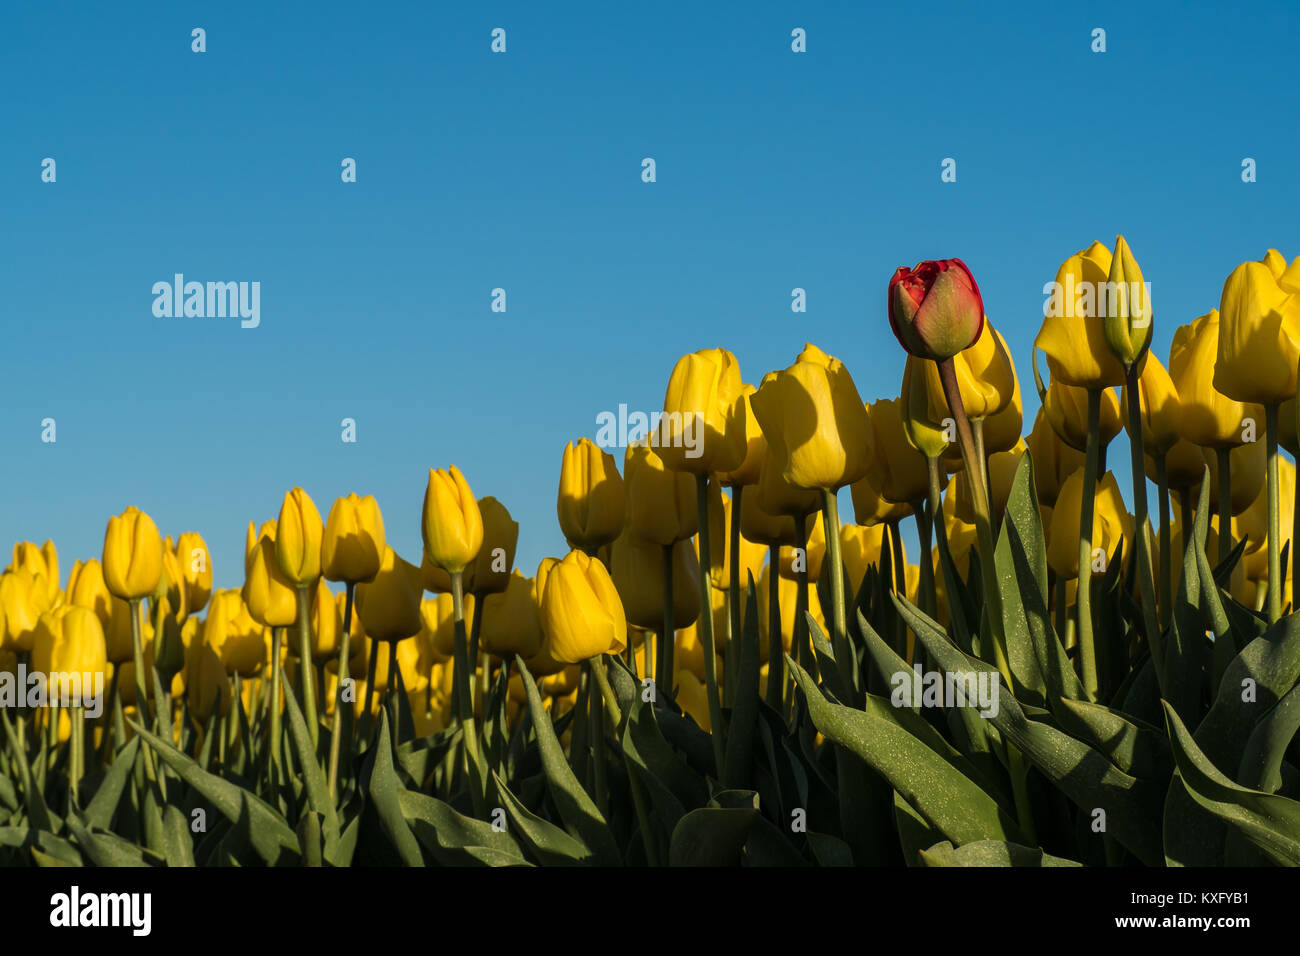 Yellow tulips and one red tulip against a clear blue sky. Stock Photo